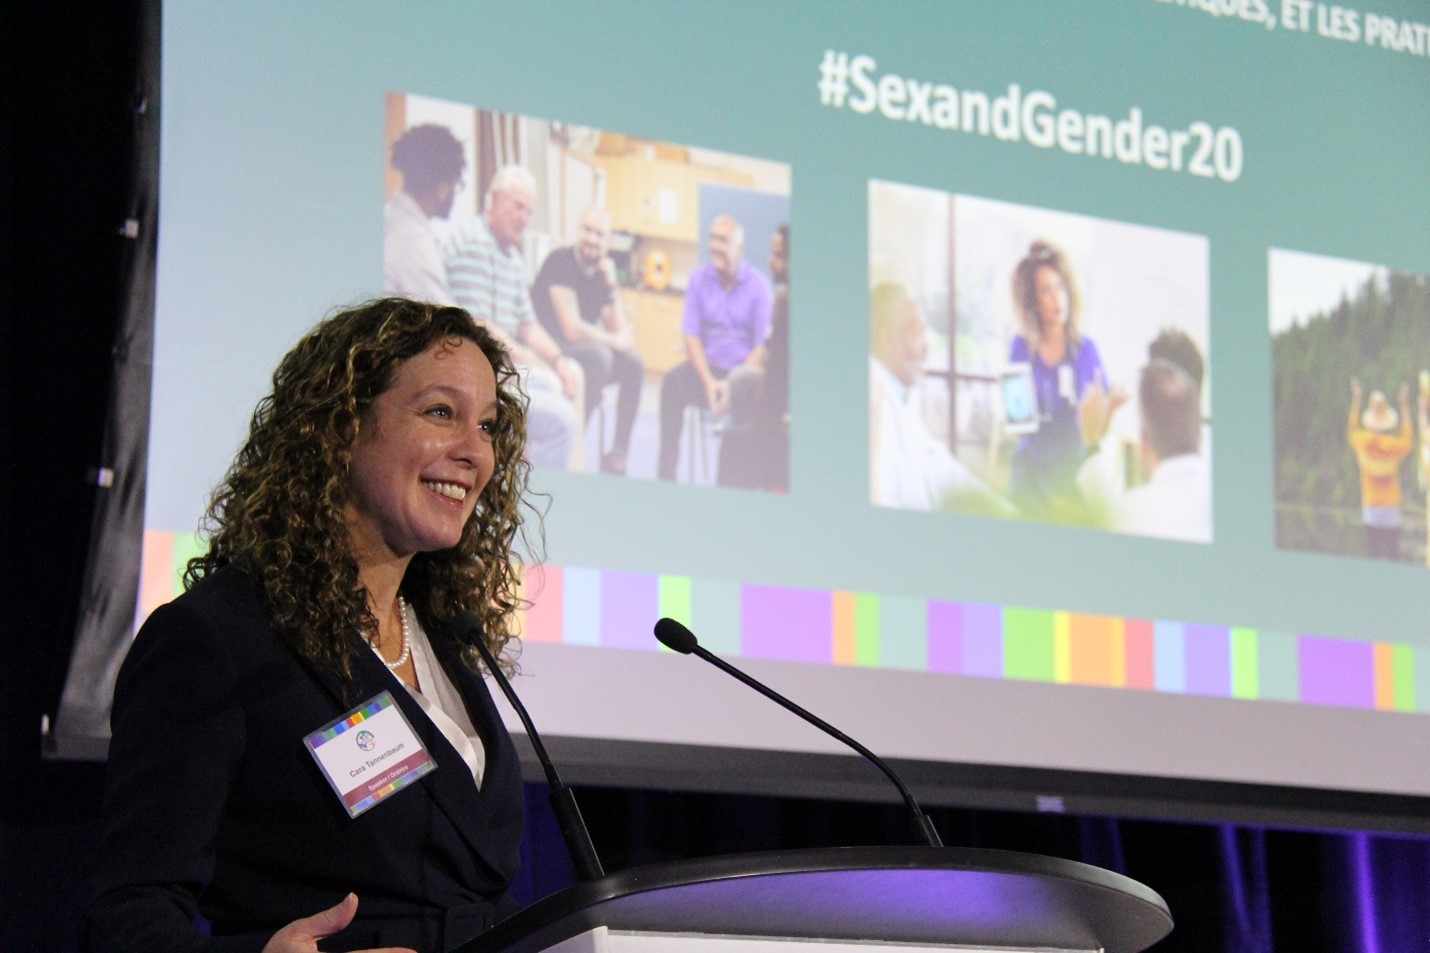 Dr. Cara Tannenbaum, standing at a podium, looking at something out of frame and smiling. Behind her is a screen with colourful images and text reading #SexAndGender20.